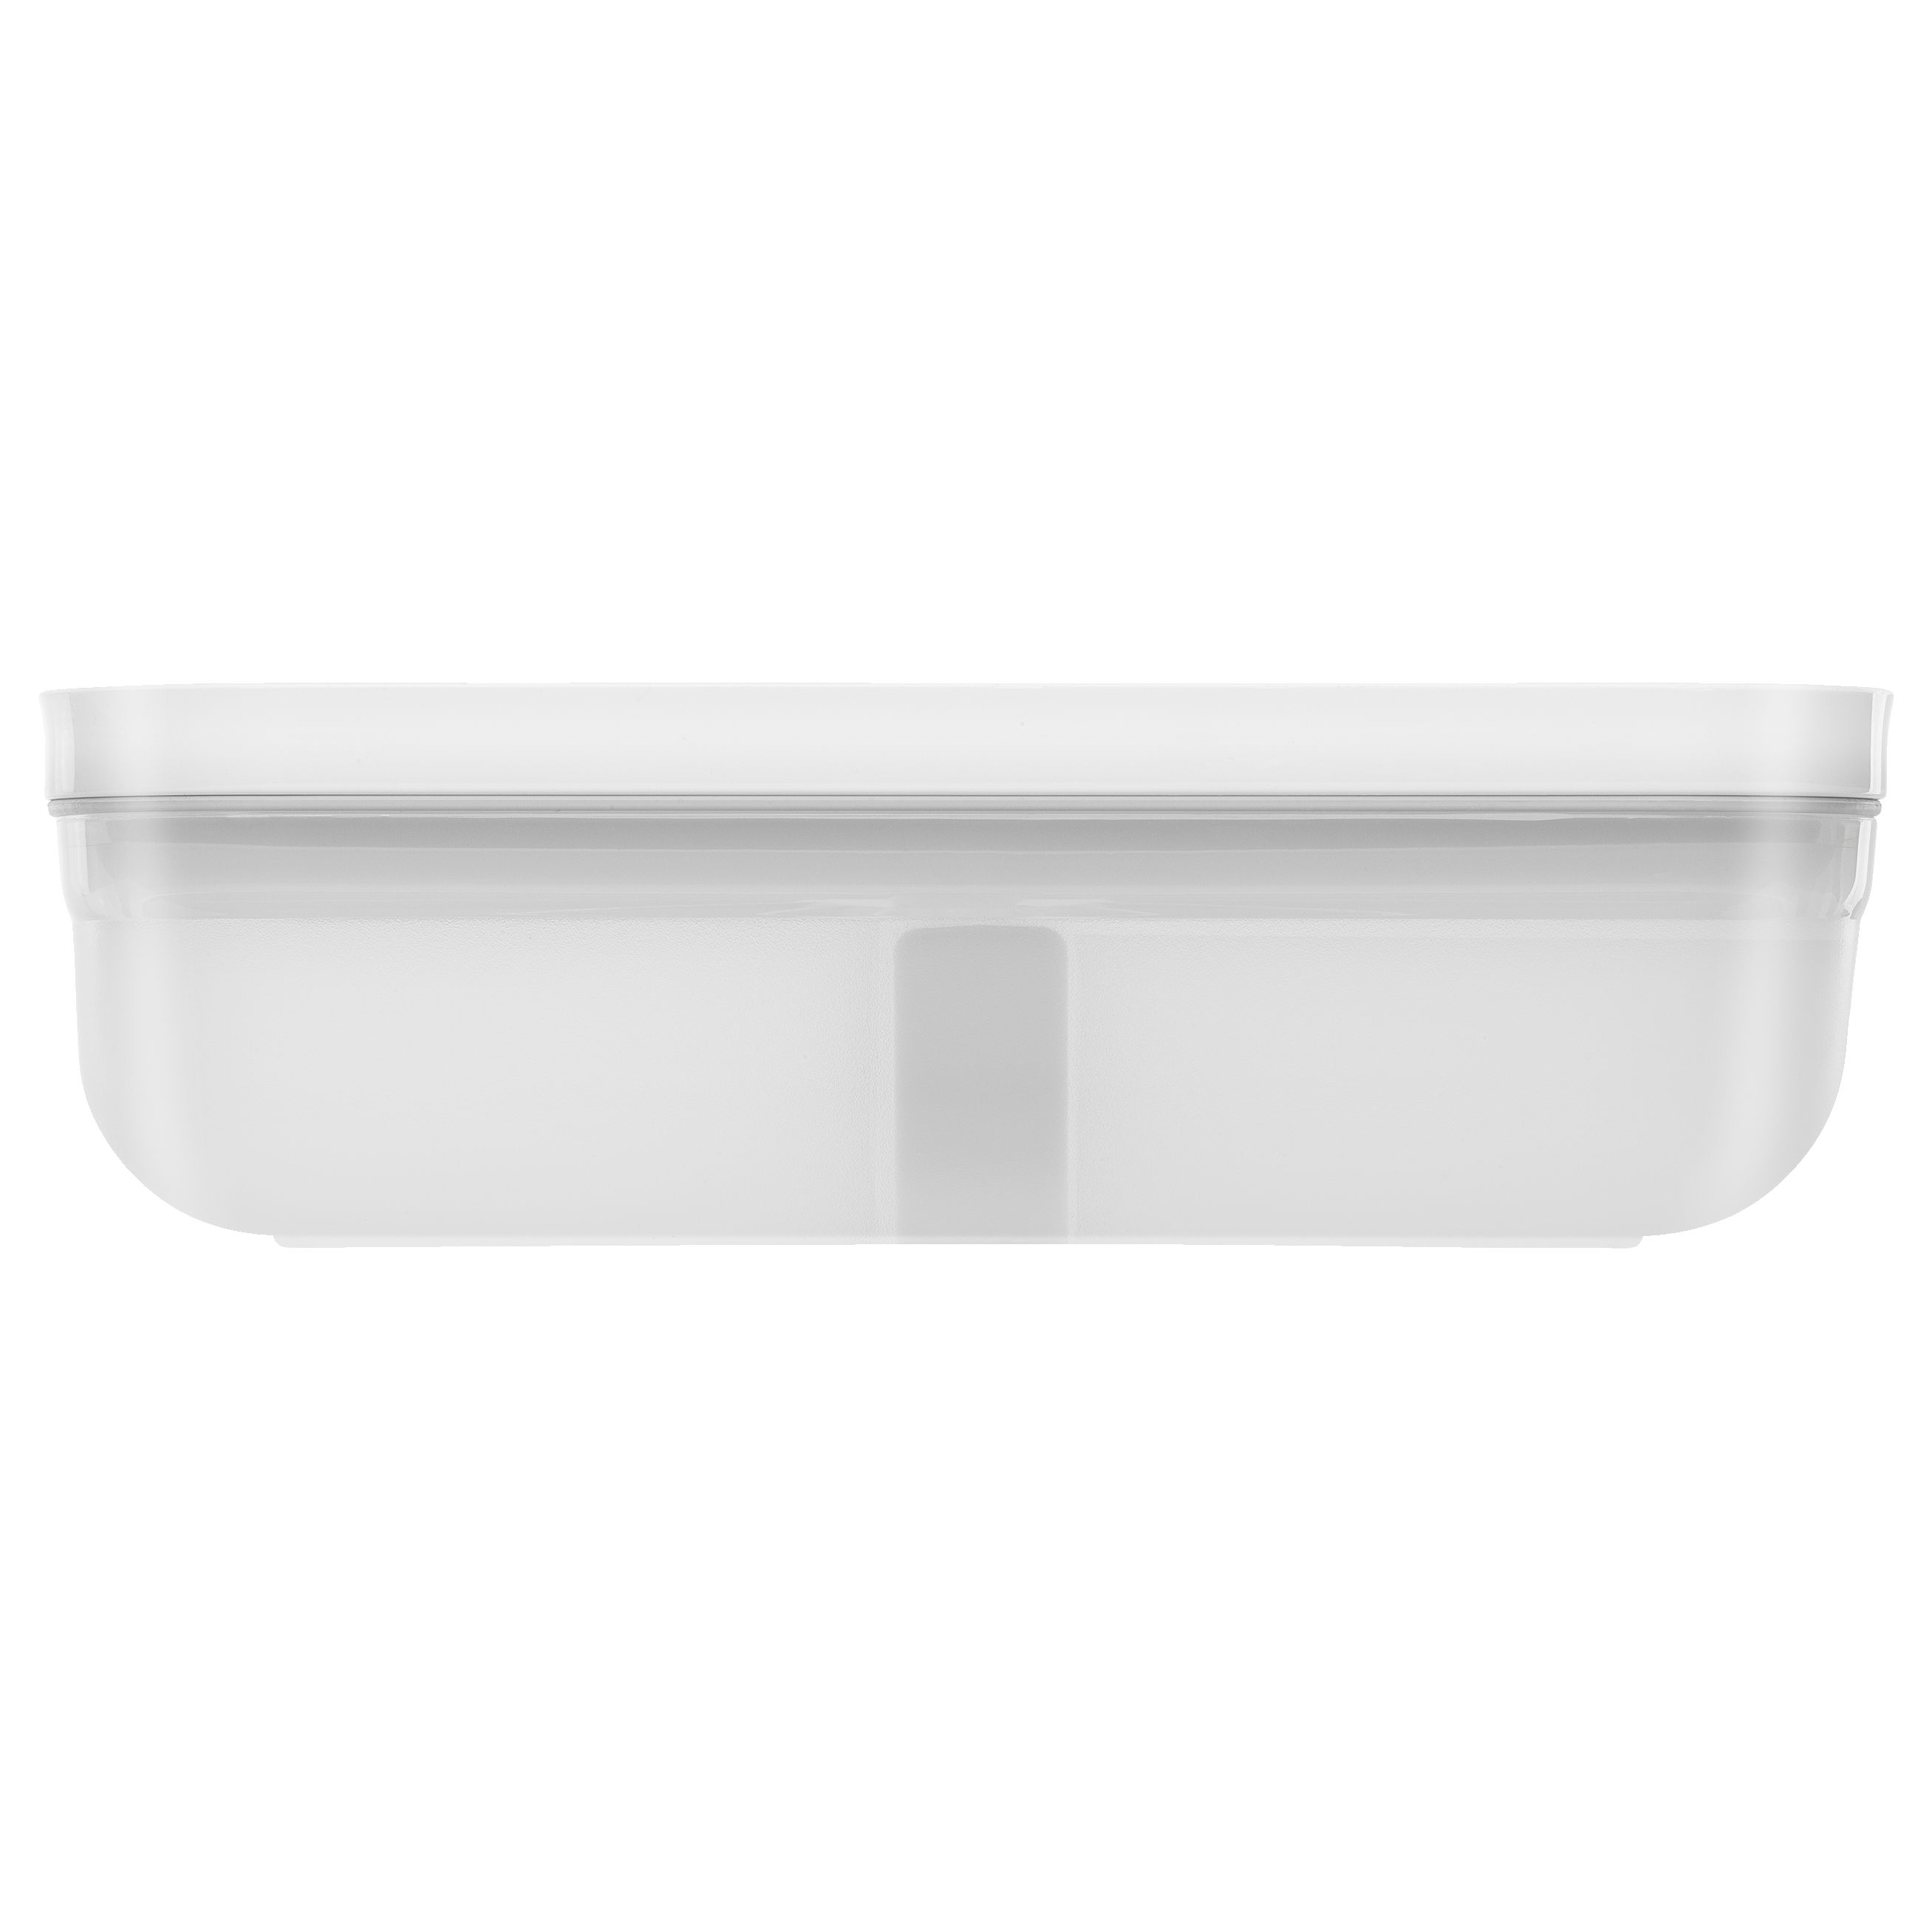 Zwilling Fresh & Save Lunch Box Plastic 15x22 cm / 1.6 L - Food Processor & Stand Mixer Accessories Silicone Grey - 1002502